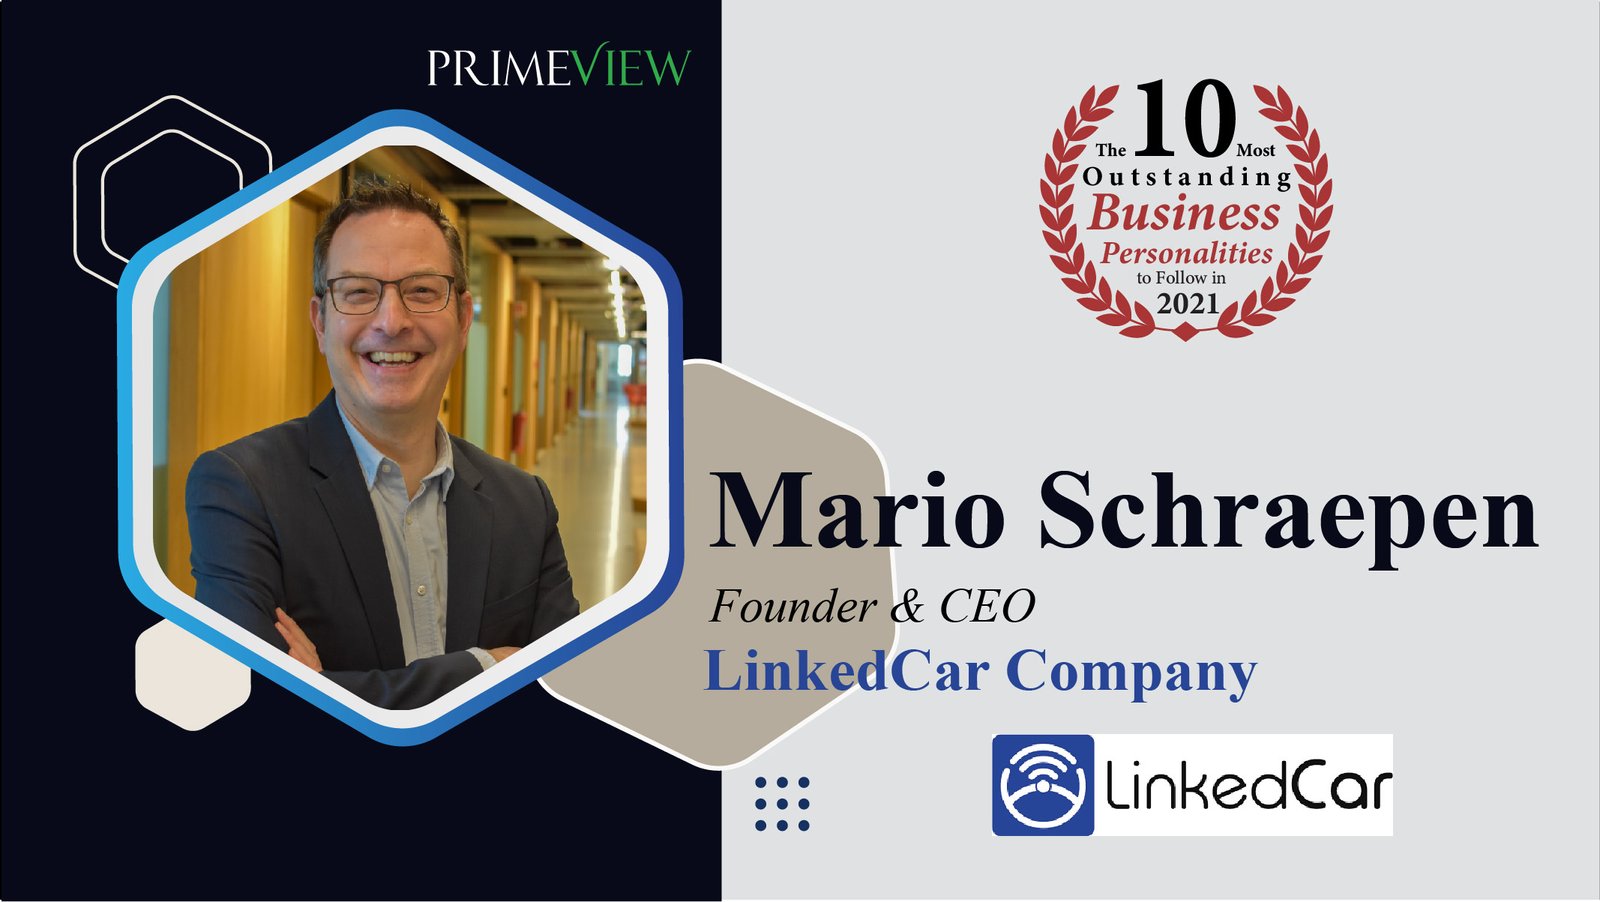 LinkedCar Company | Founder & CEO | Mario Schraepen: First Mobility platform for the Automotive Industry in Path-Breaking Journey